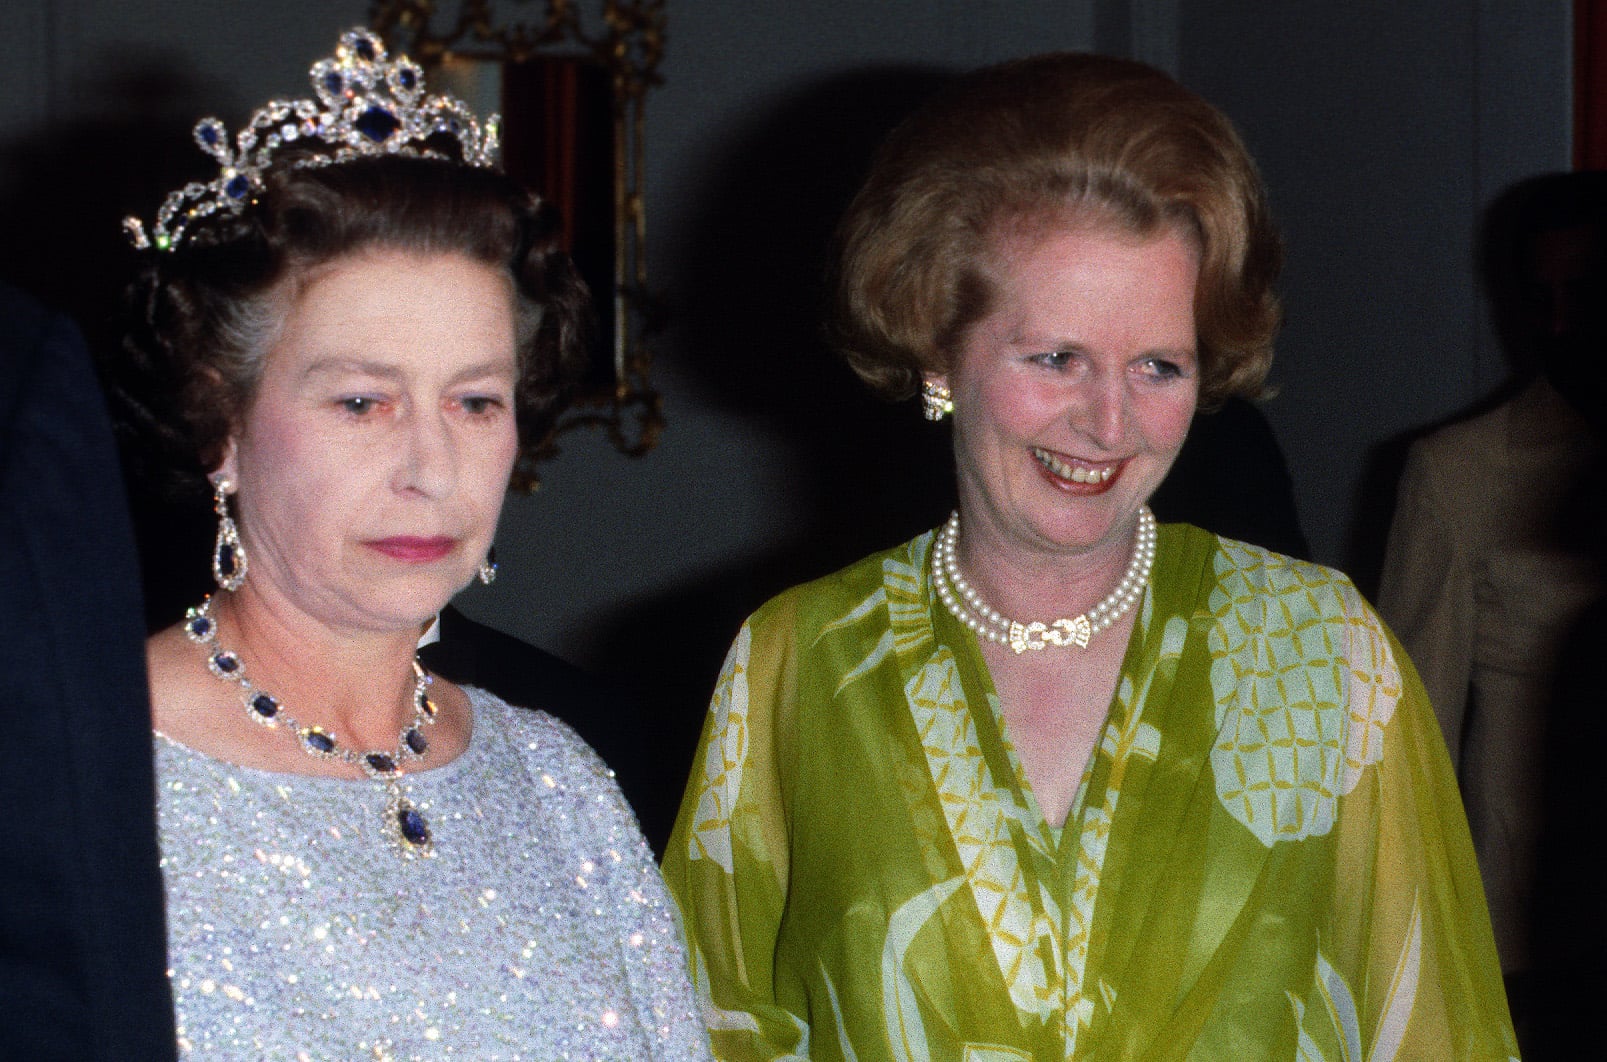 LUSAKA, ZAMBIA - AUGUST 01:  Queen Elizabeth II and Prime Minister Margaret Thatcher attend a ball to celebrate the Commonwealth Heads of Government Meeting hosted by President Kenneth Kaunda on August 01, 1979 in Lusaka, Zambia. (Photo by Anwar Hussein/Getty Images)